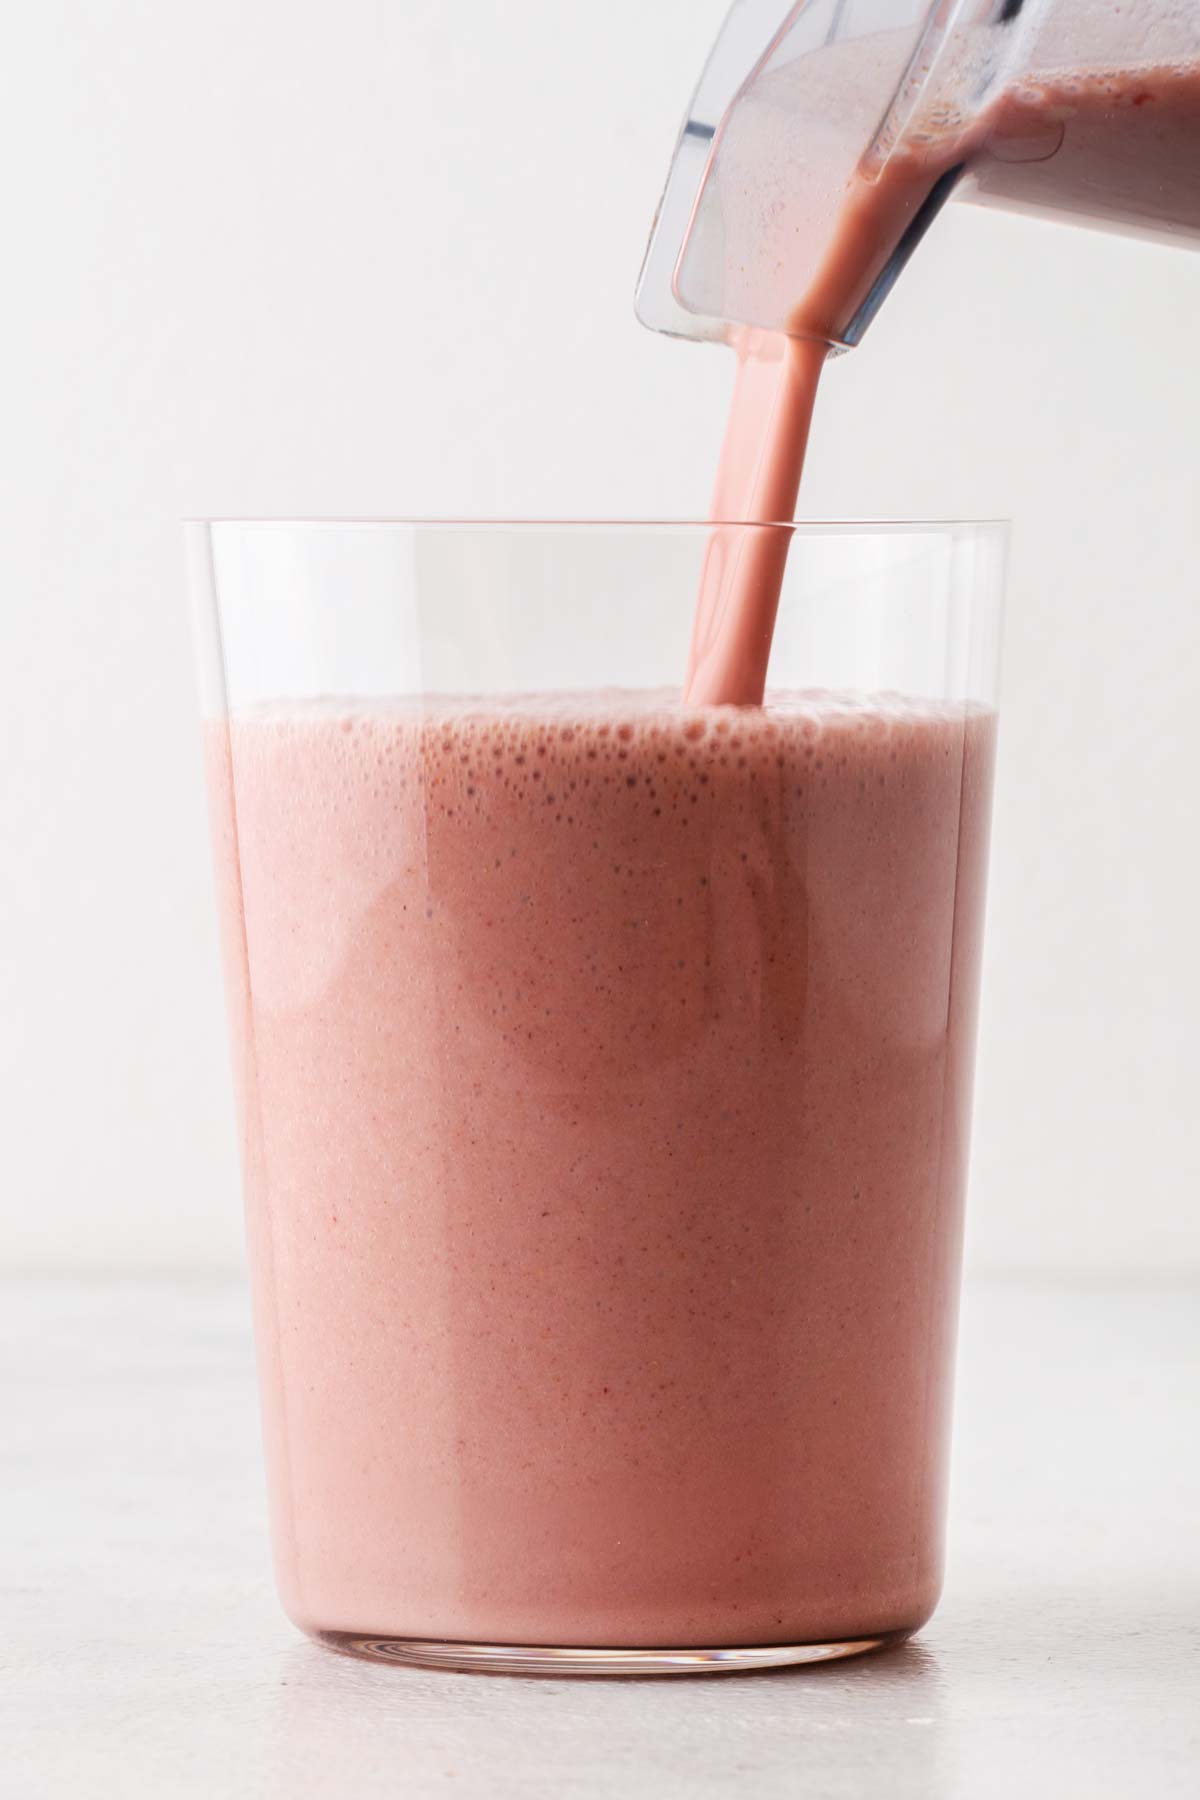 Pouring a strawberry protein shake in a glass.